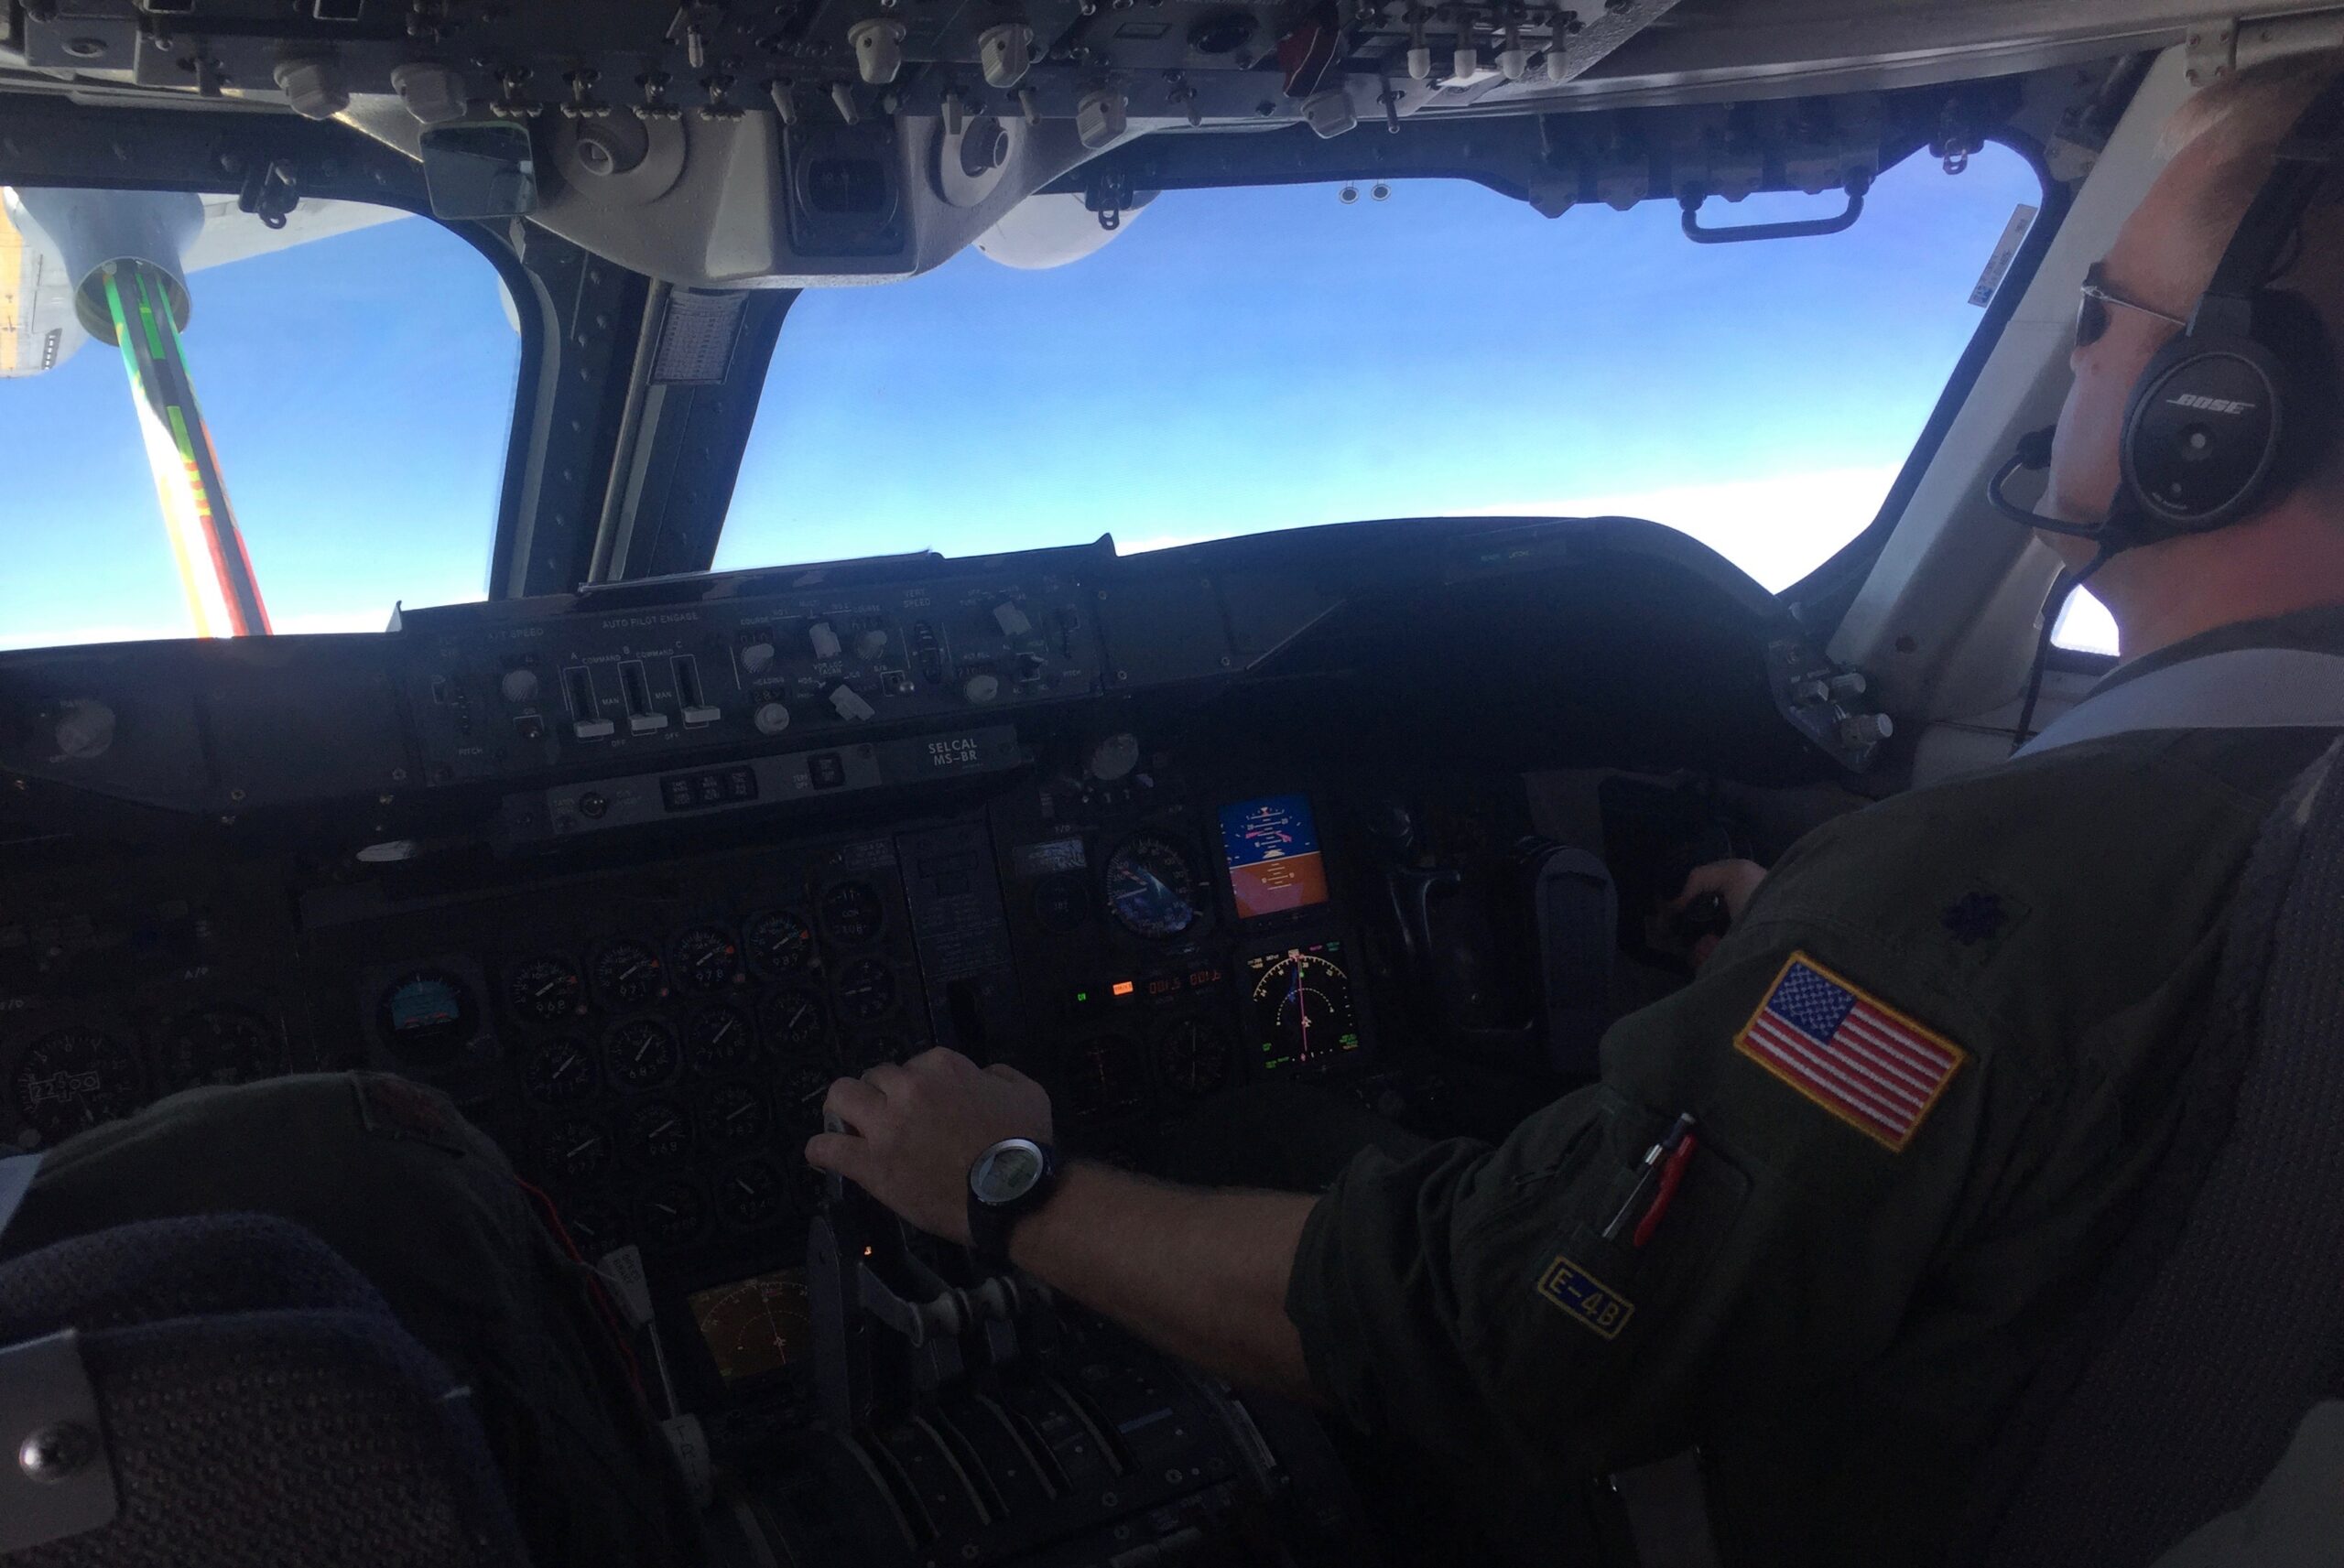 Refueling An E-4B, With SecDef Aboard